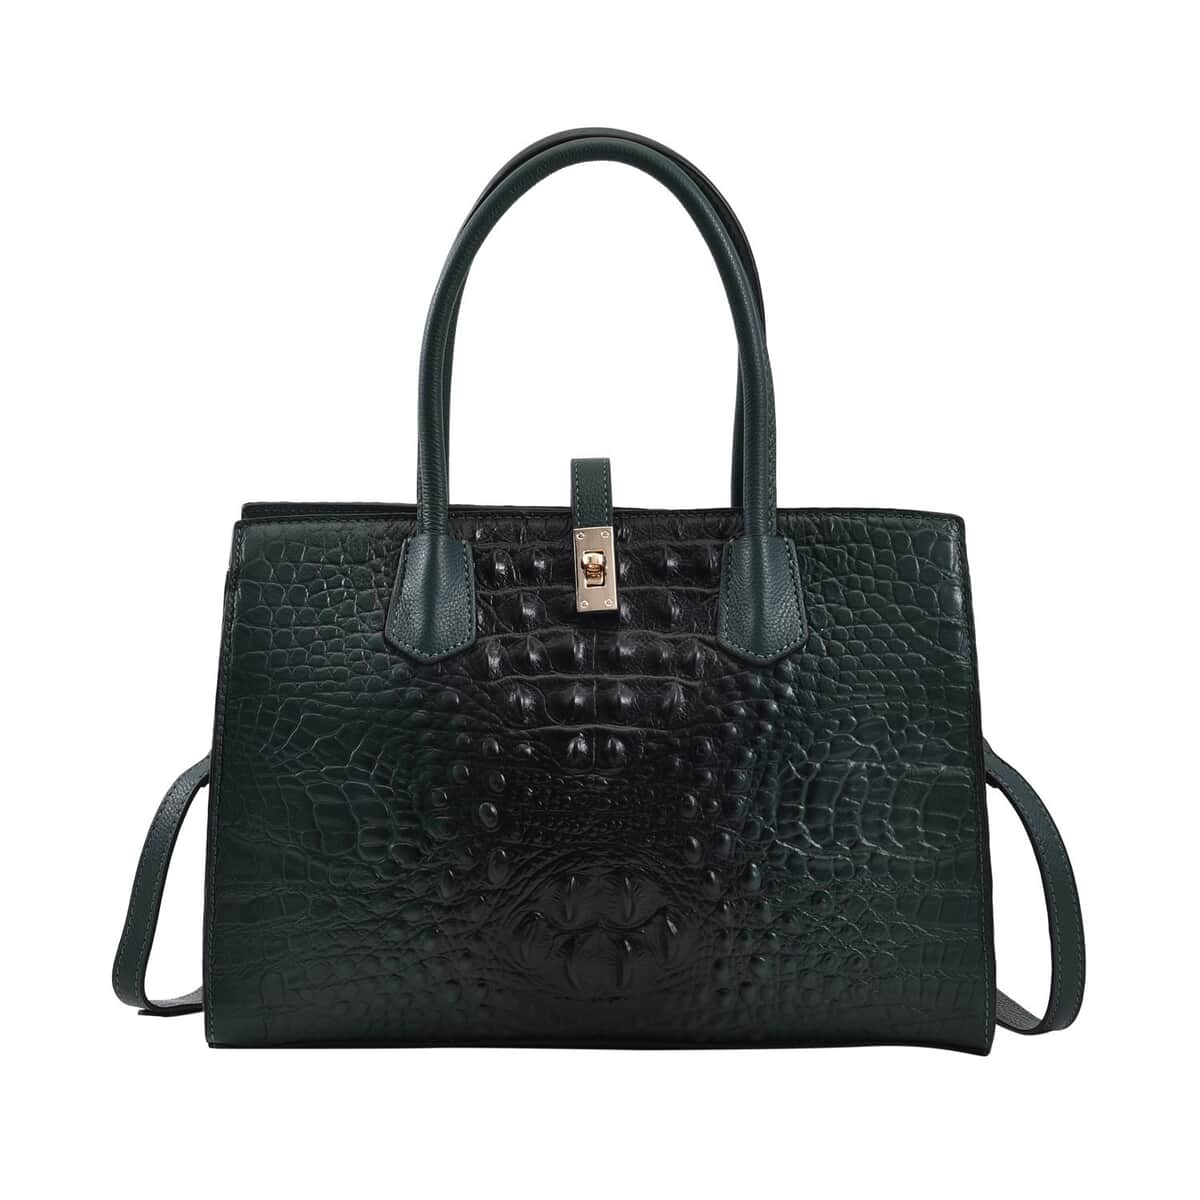 THE MONACO Dark Green with Black Genuine Leather Croc Embossed Convertible Tote Bag with Detachable Long Strap (12.60''x3.74''x9.06'') image number 0